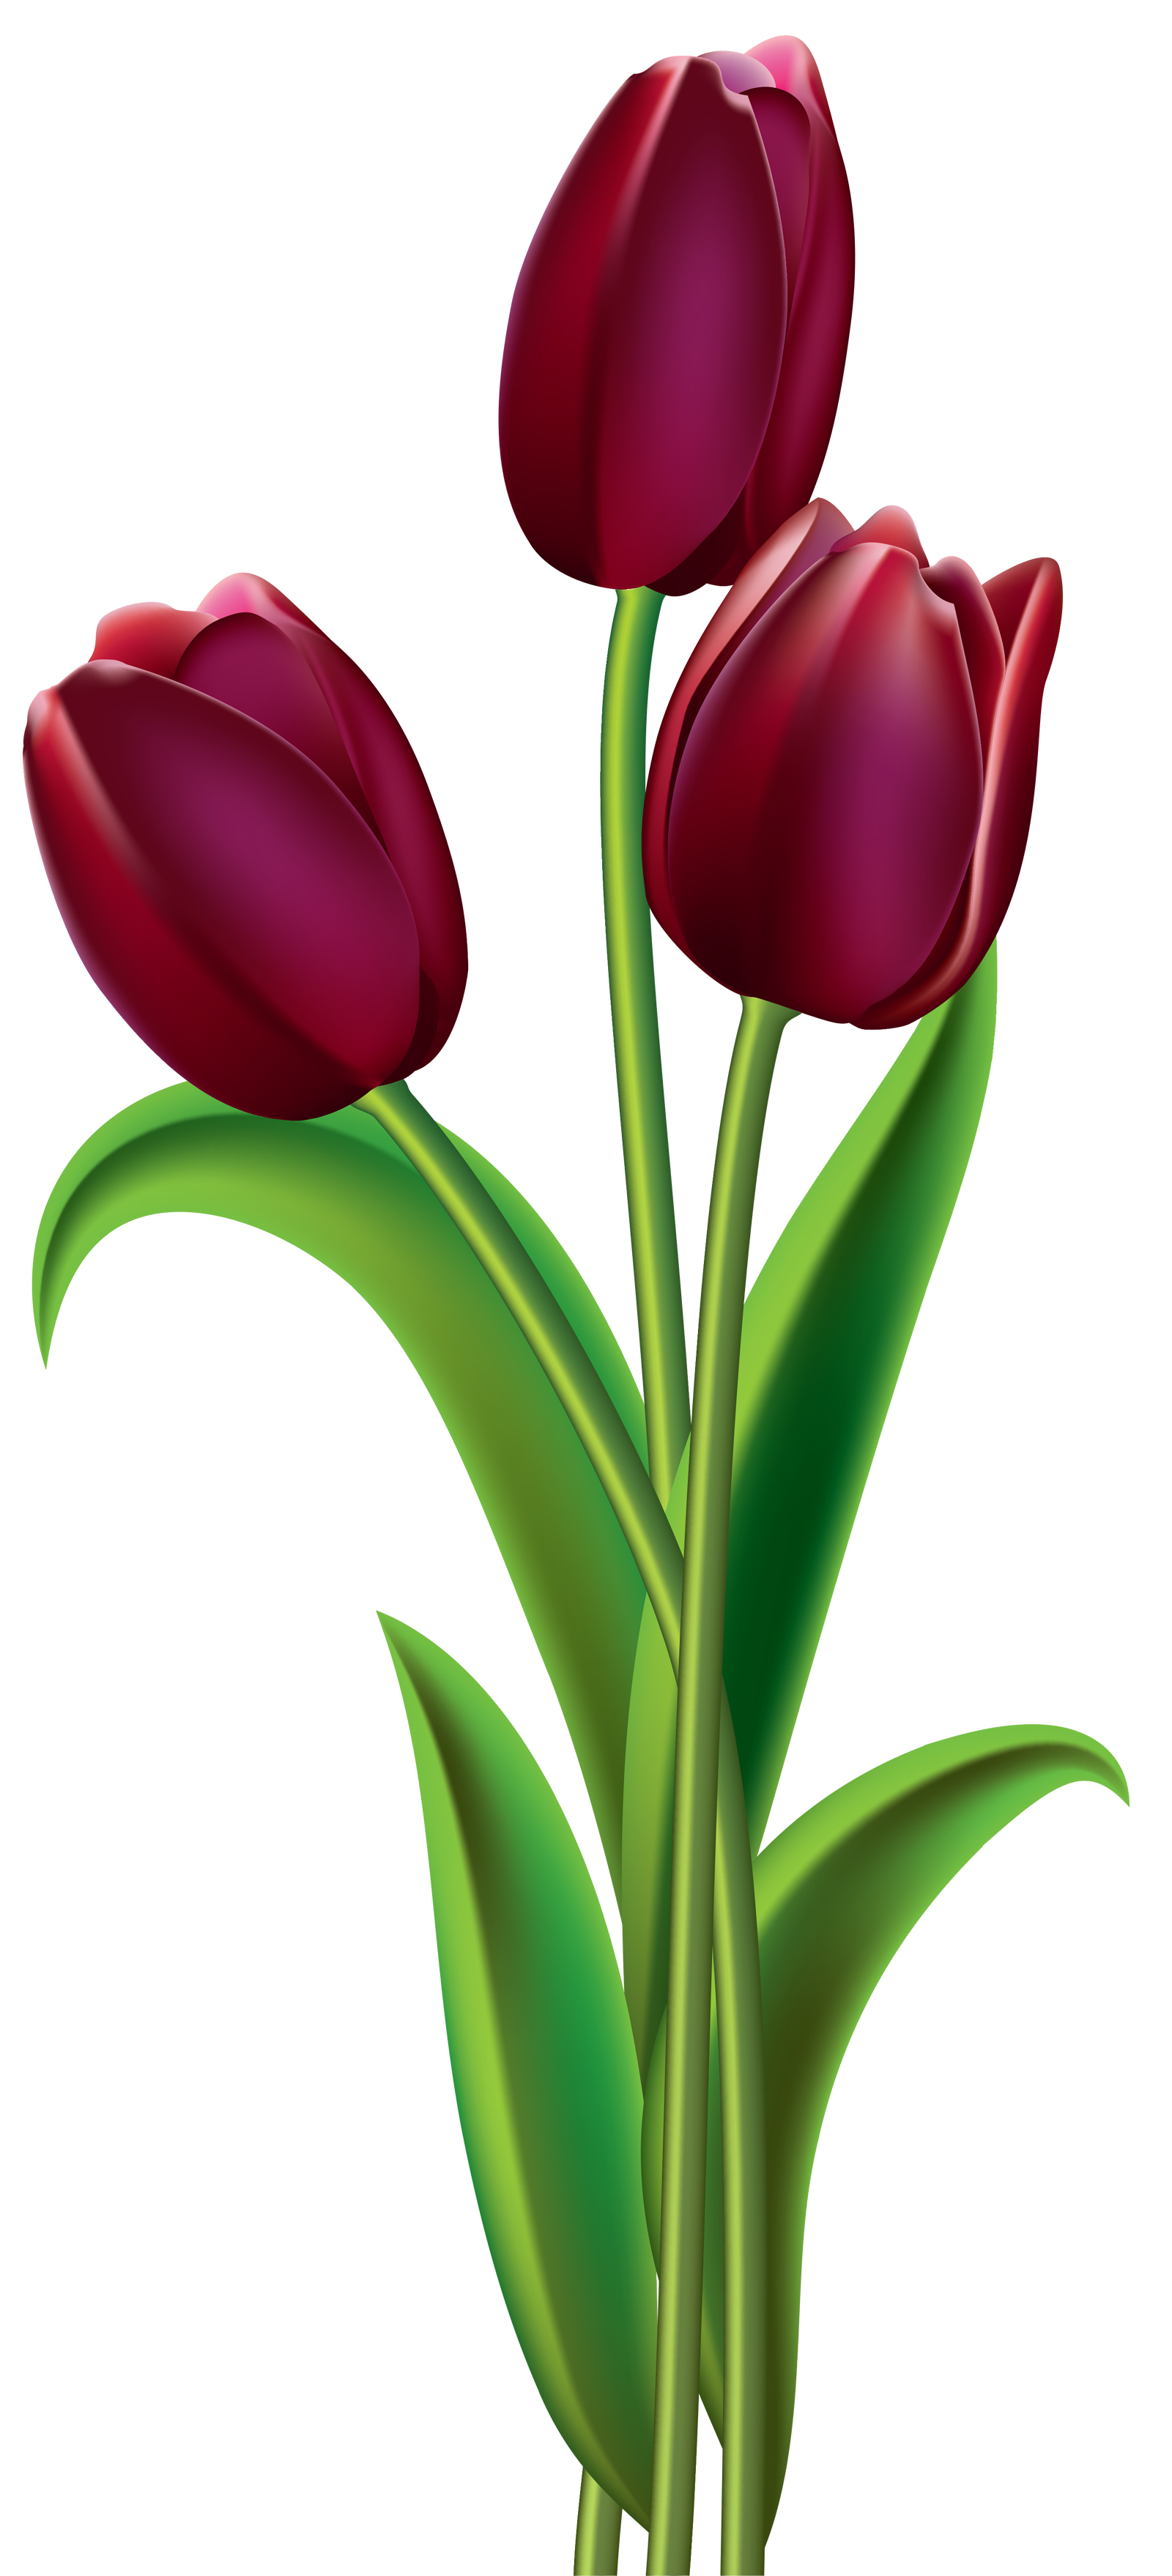 tulip flower png images gallery #35190